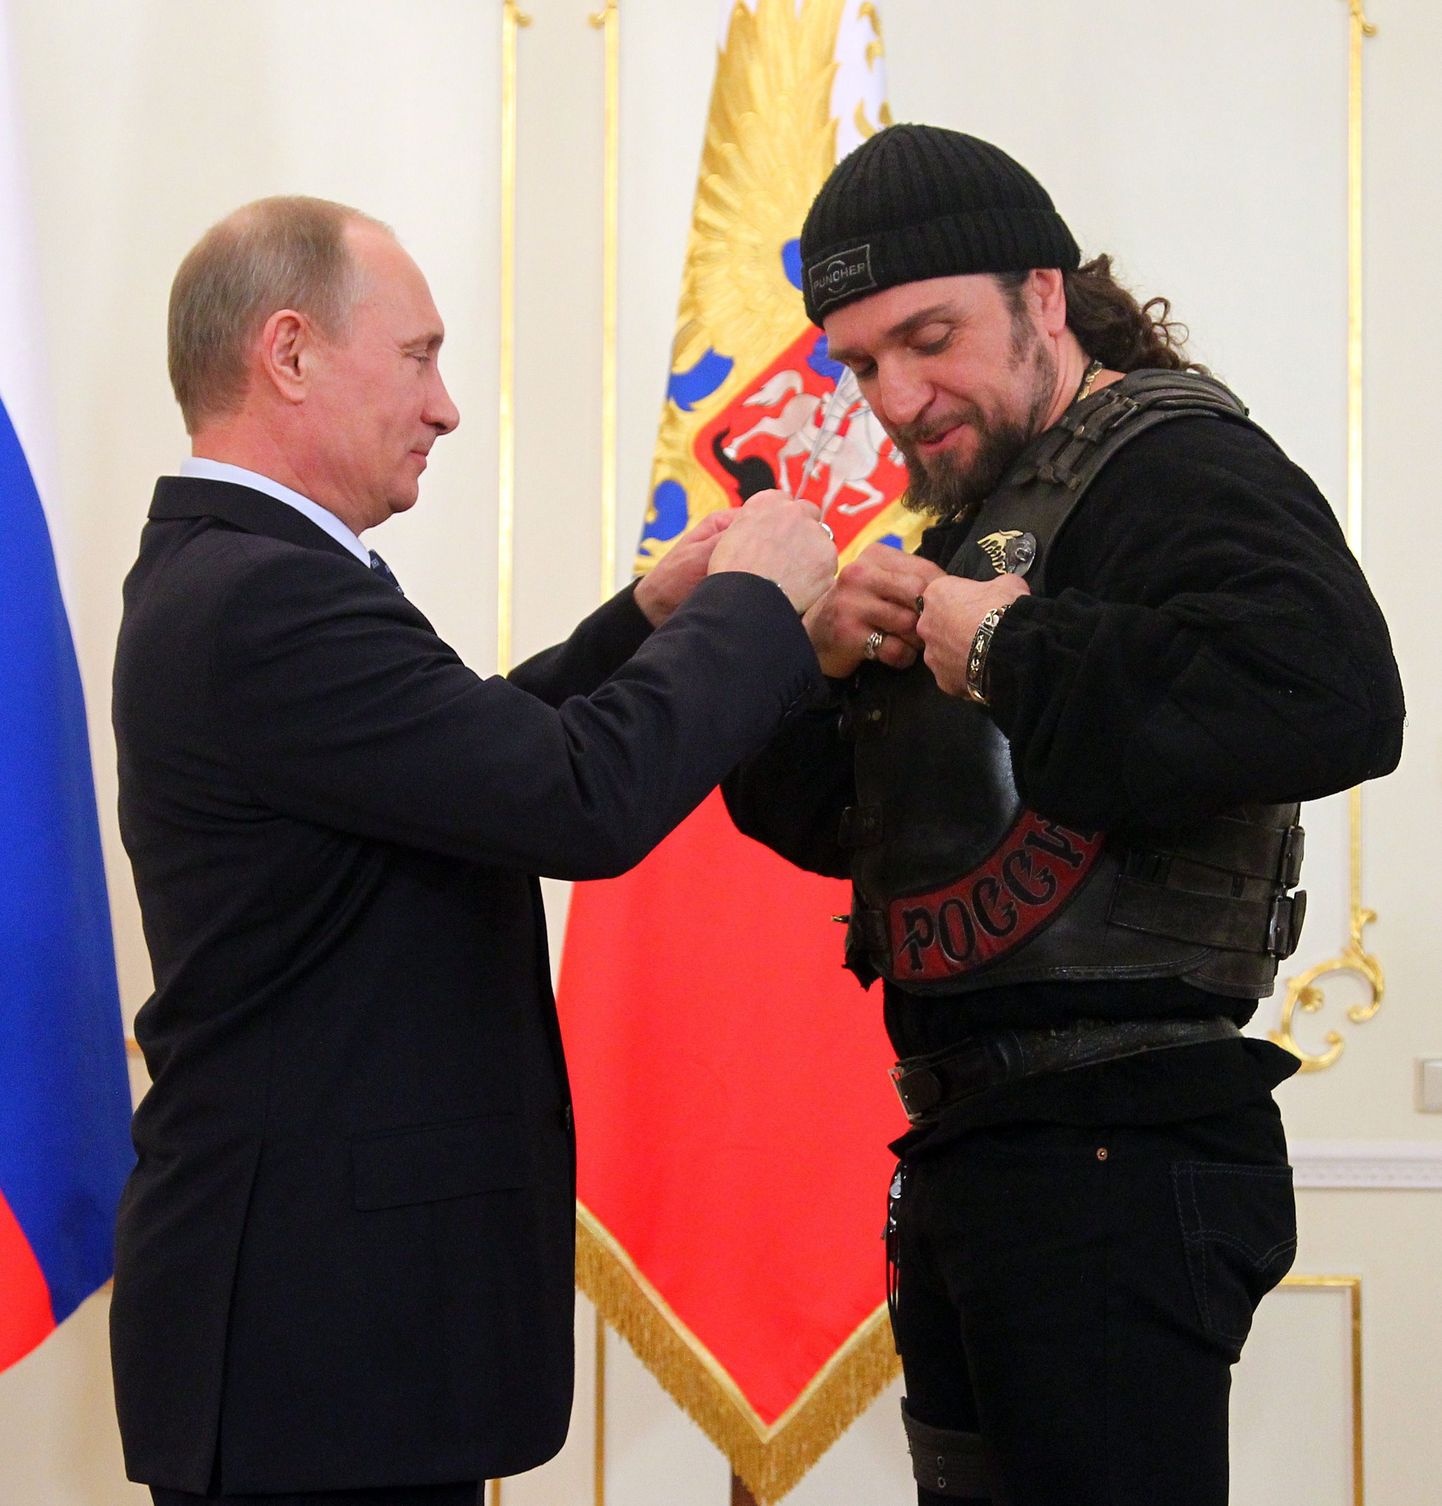 Russian President Vladimir Putin, left, presents a medal to Alexander Zaldostanov, a leader of Russian bikers movement, at his meeting with members of the Military History Society in the Novo-Ogaryovo residence outside Moscow, Thursday, March 14, 2013. (AP Photo/RIA-Novosti, Mikhail Klimentyev, Presidential Press Service) / SCANPIX Code: 436